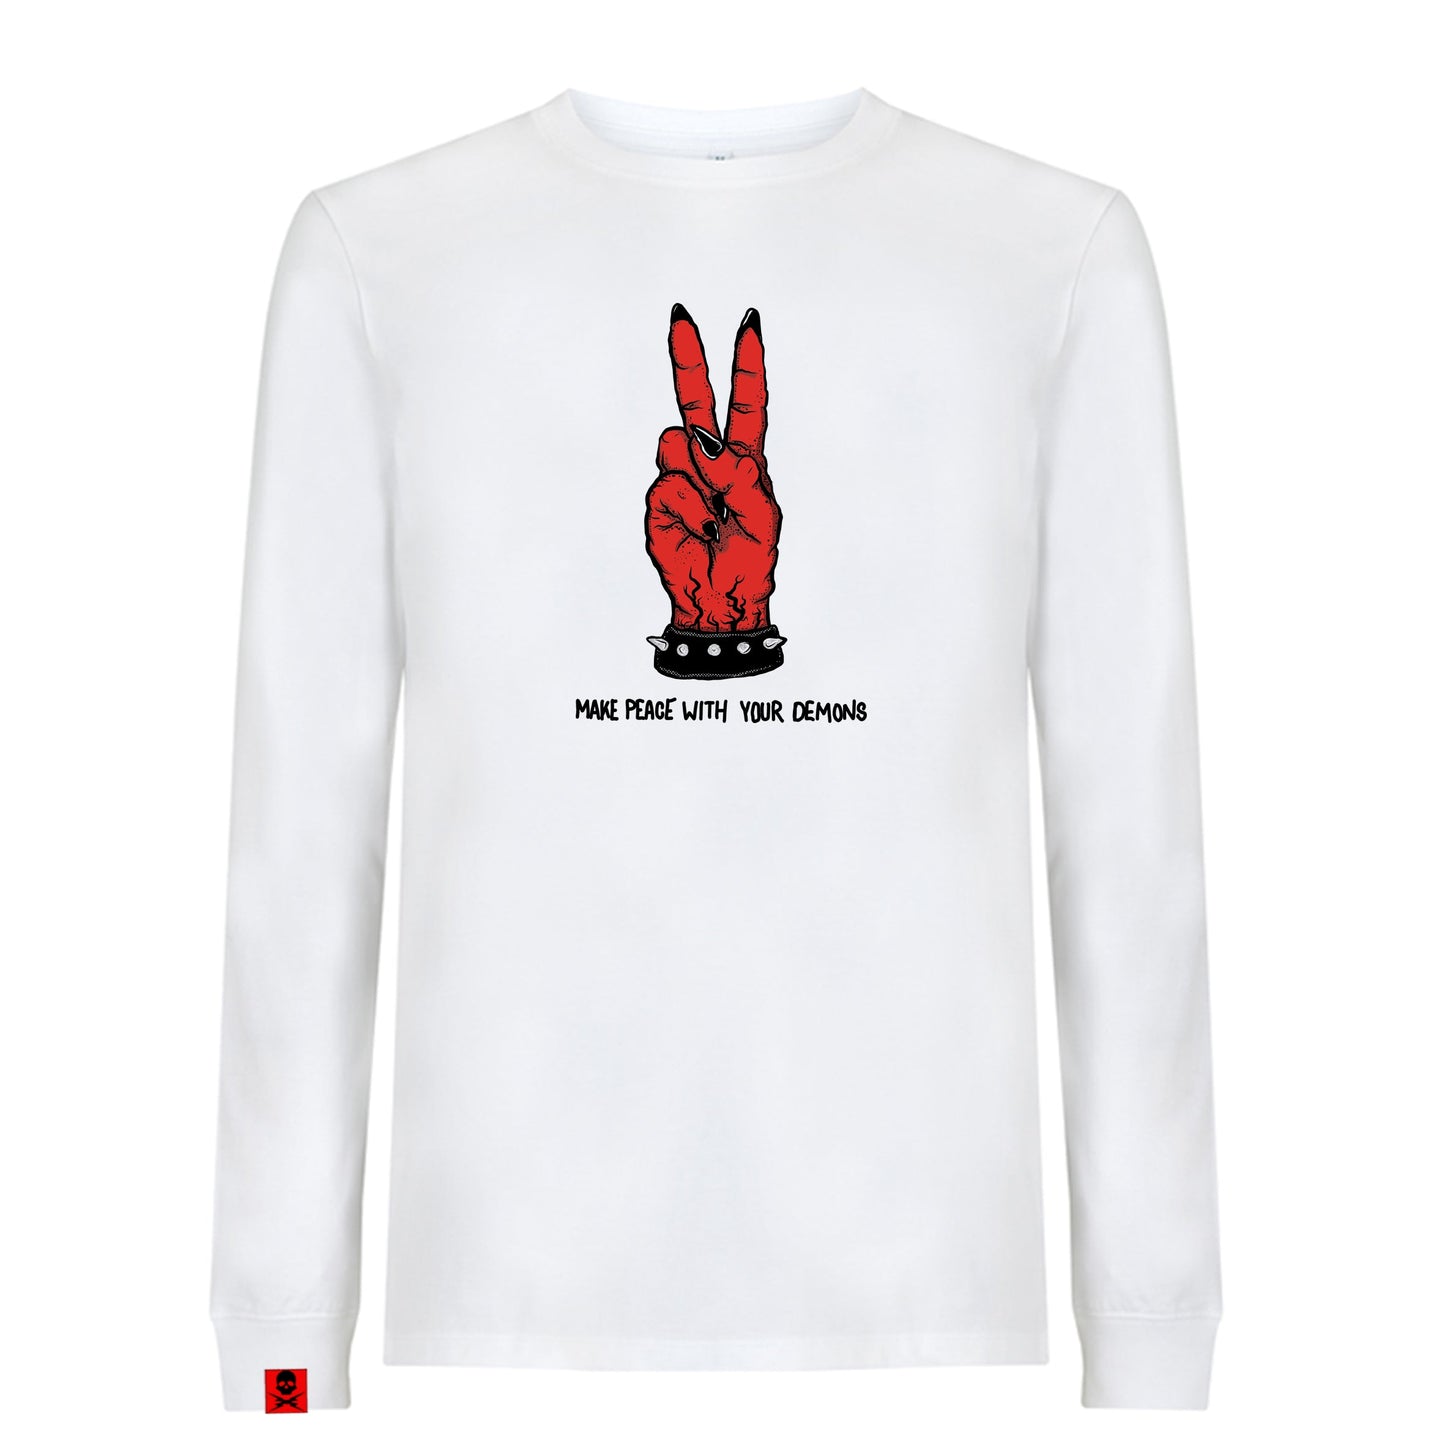 'Make Peace With Your Demons' Long sleeve T-Shirt (White) - Deth Kult